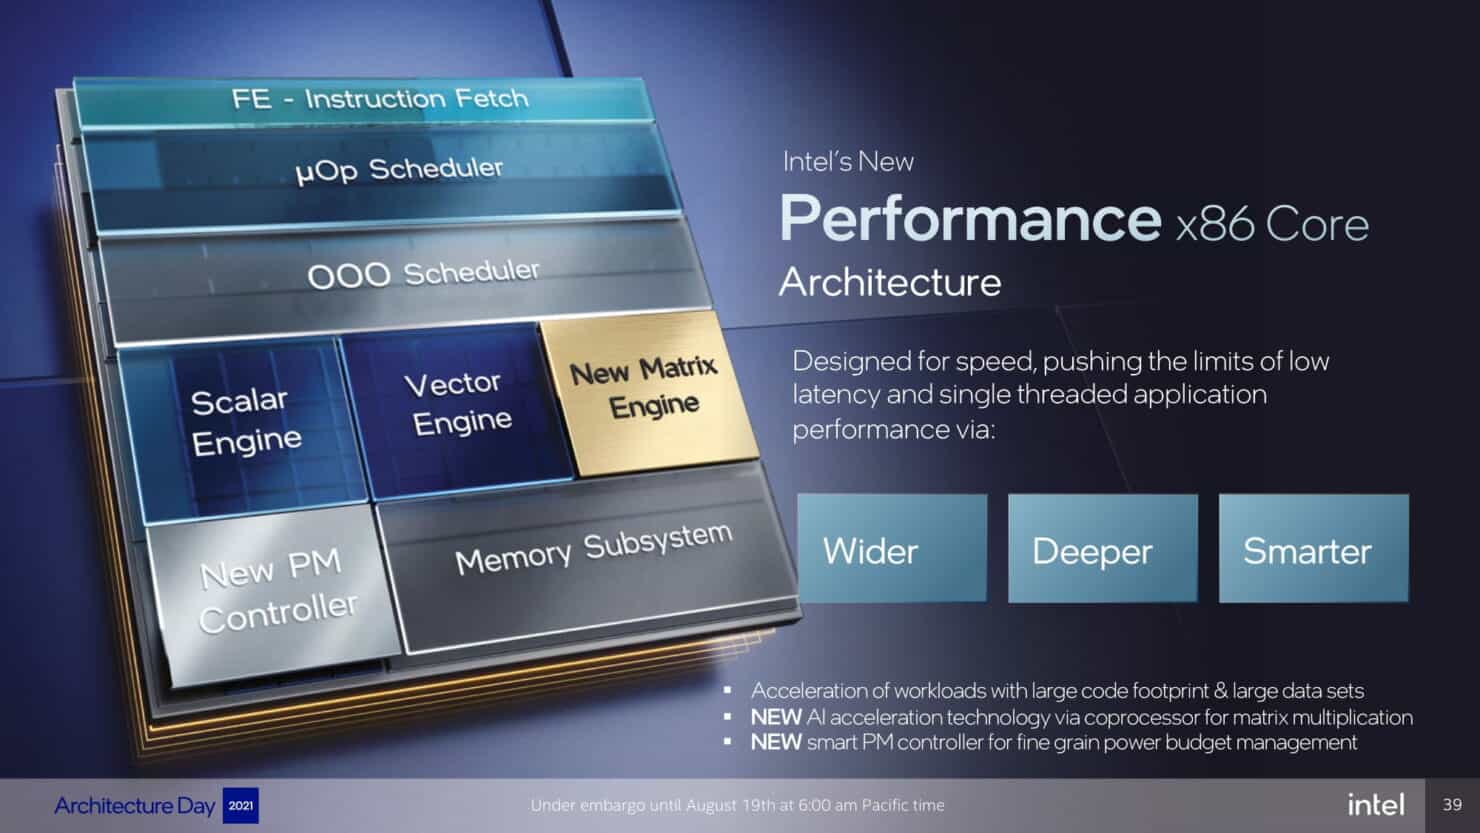 Intel's Performance Core architecture, with Wider, Deeper and Smarter cores. 